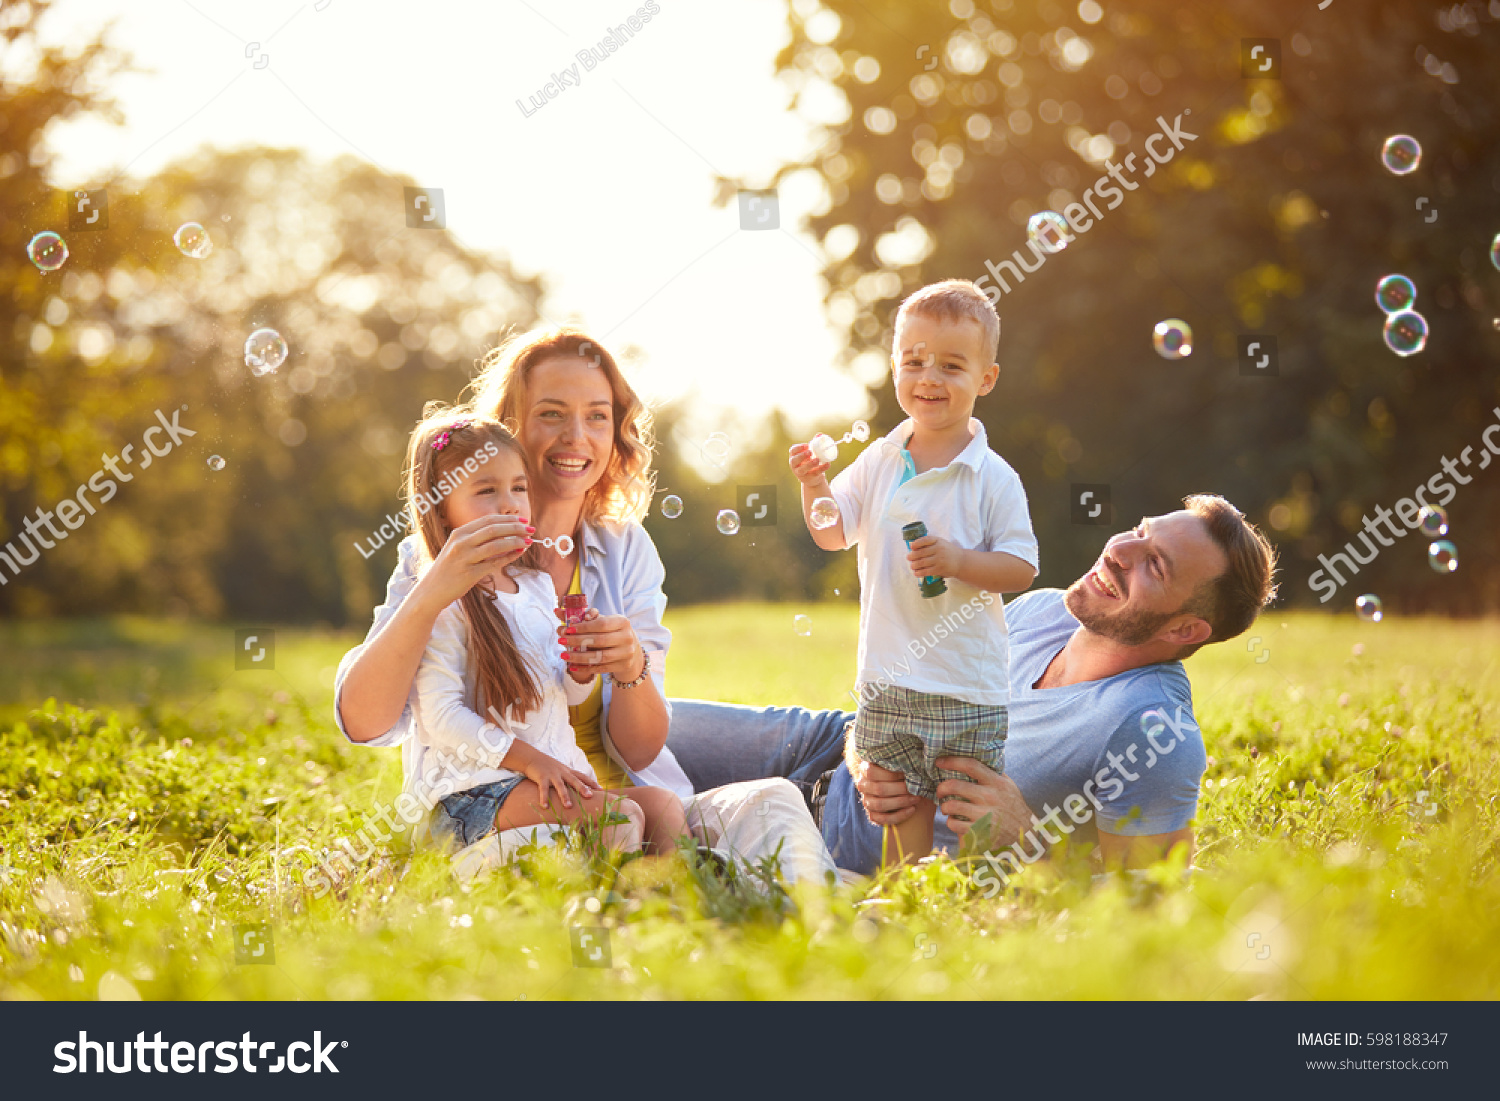 Family with children blow soap bubbles outdoor #598188347